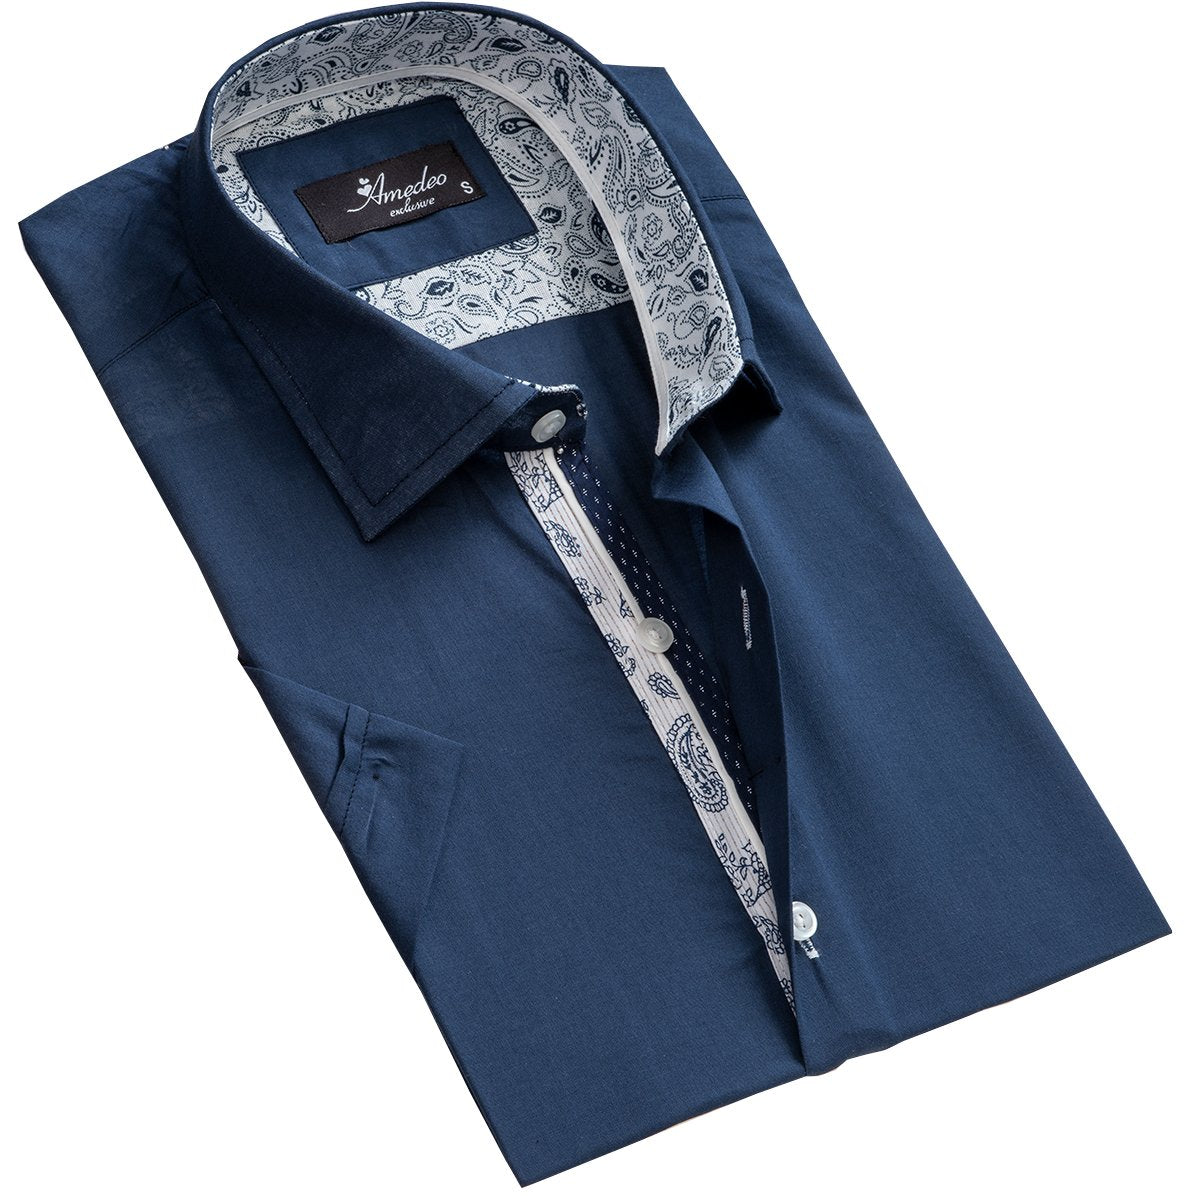 Men's Button down Tailor Fit Soft 100% Cotton Short Sleeve Dress Shirt Solid Navy Blue casual And Formal - Amedeo Exclusive